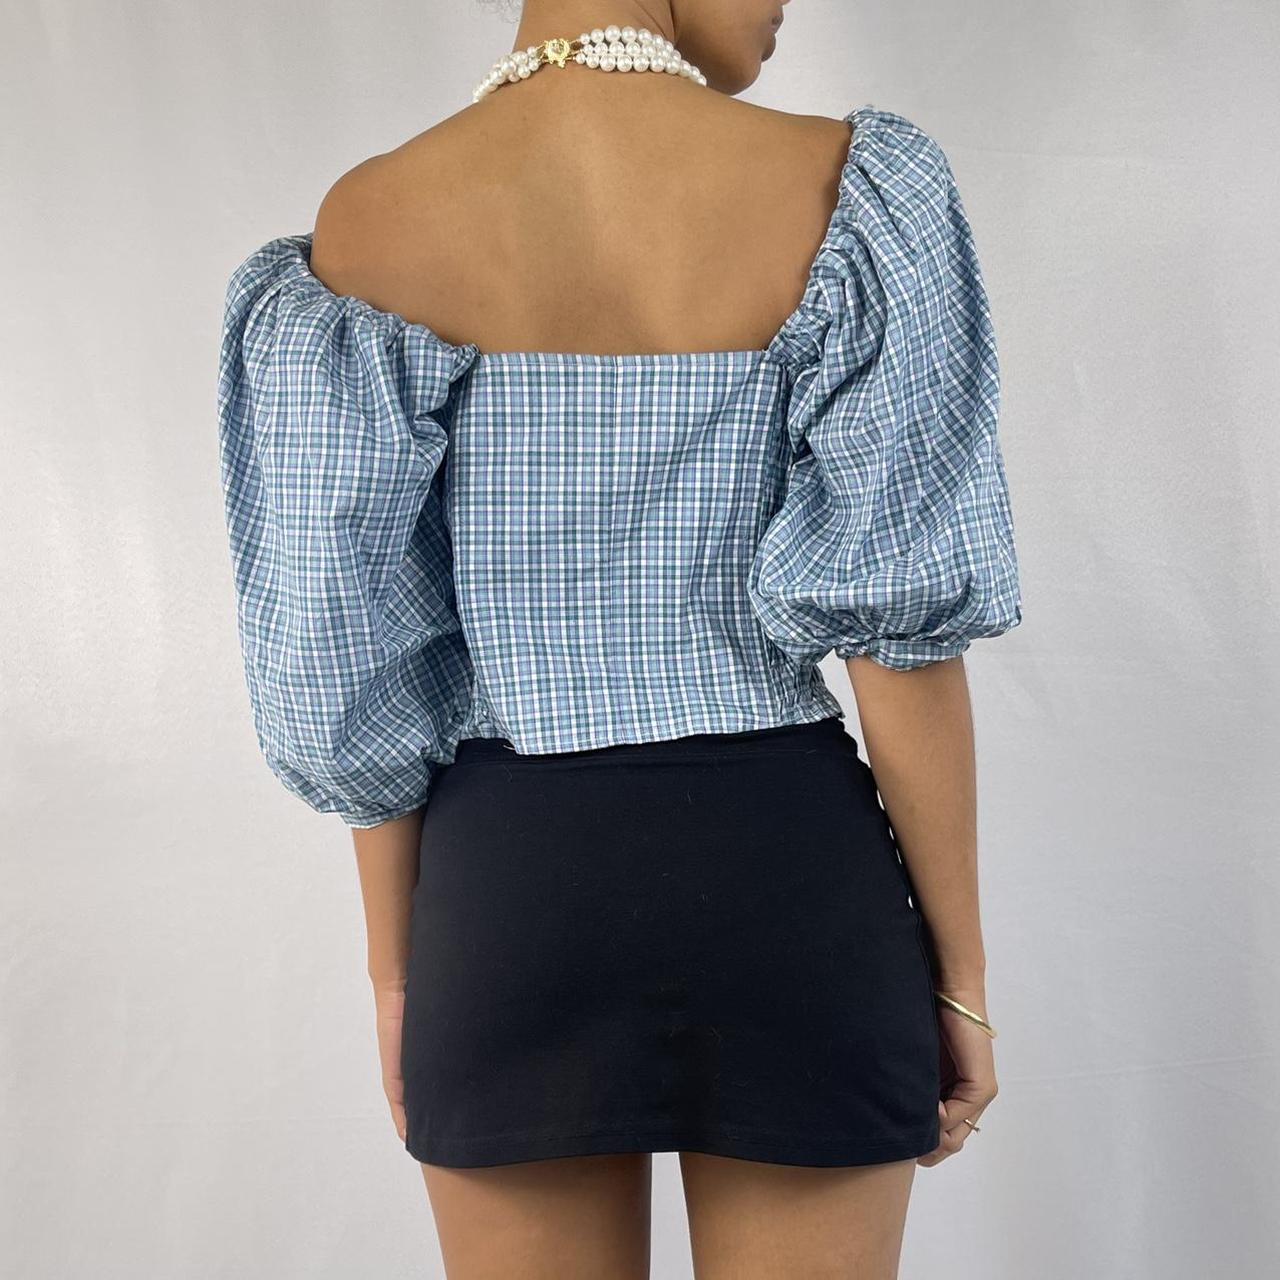 Product Image 4 - VINTAGE 90S MILKMAID TOP

ABOUT THE